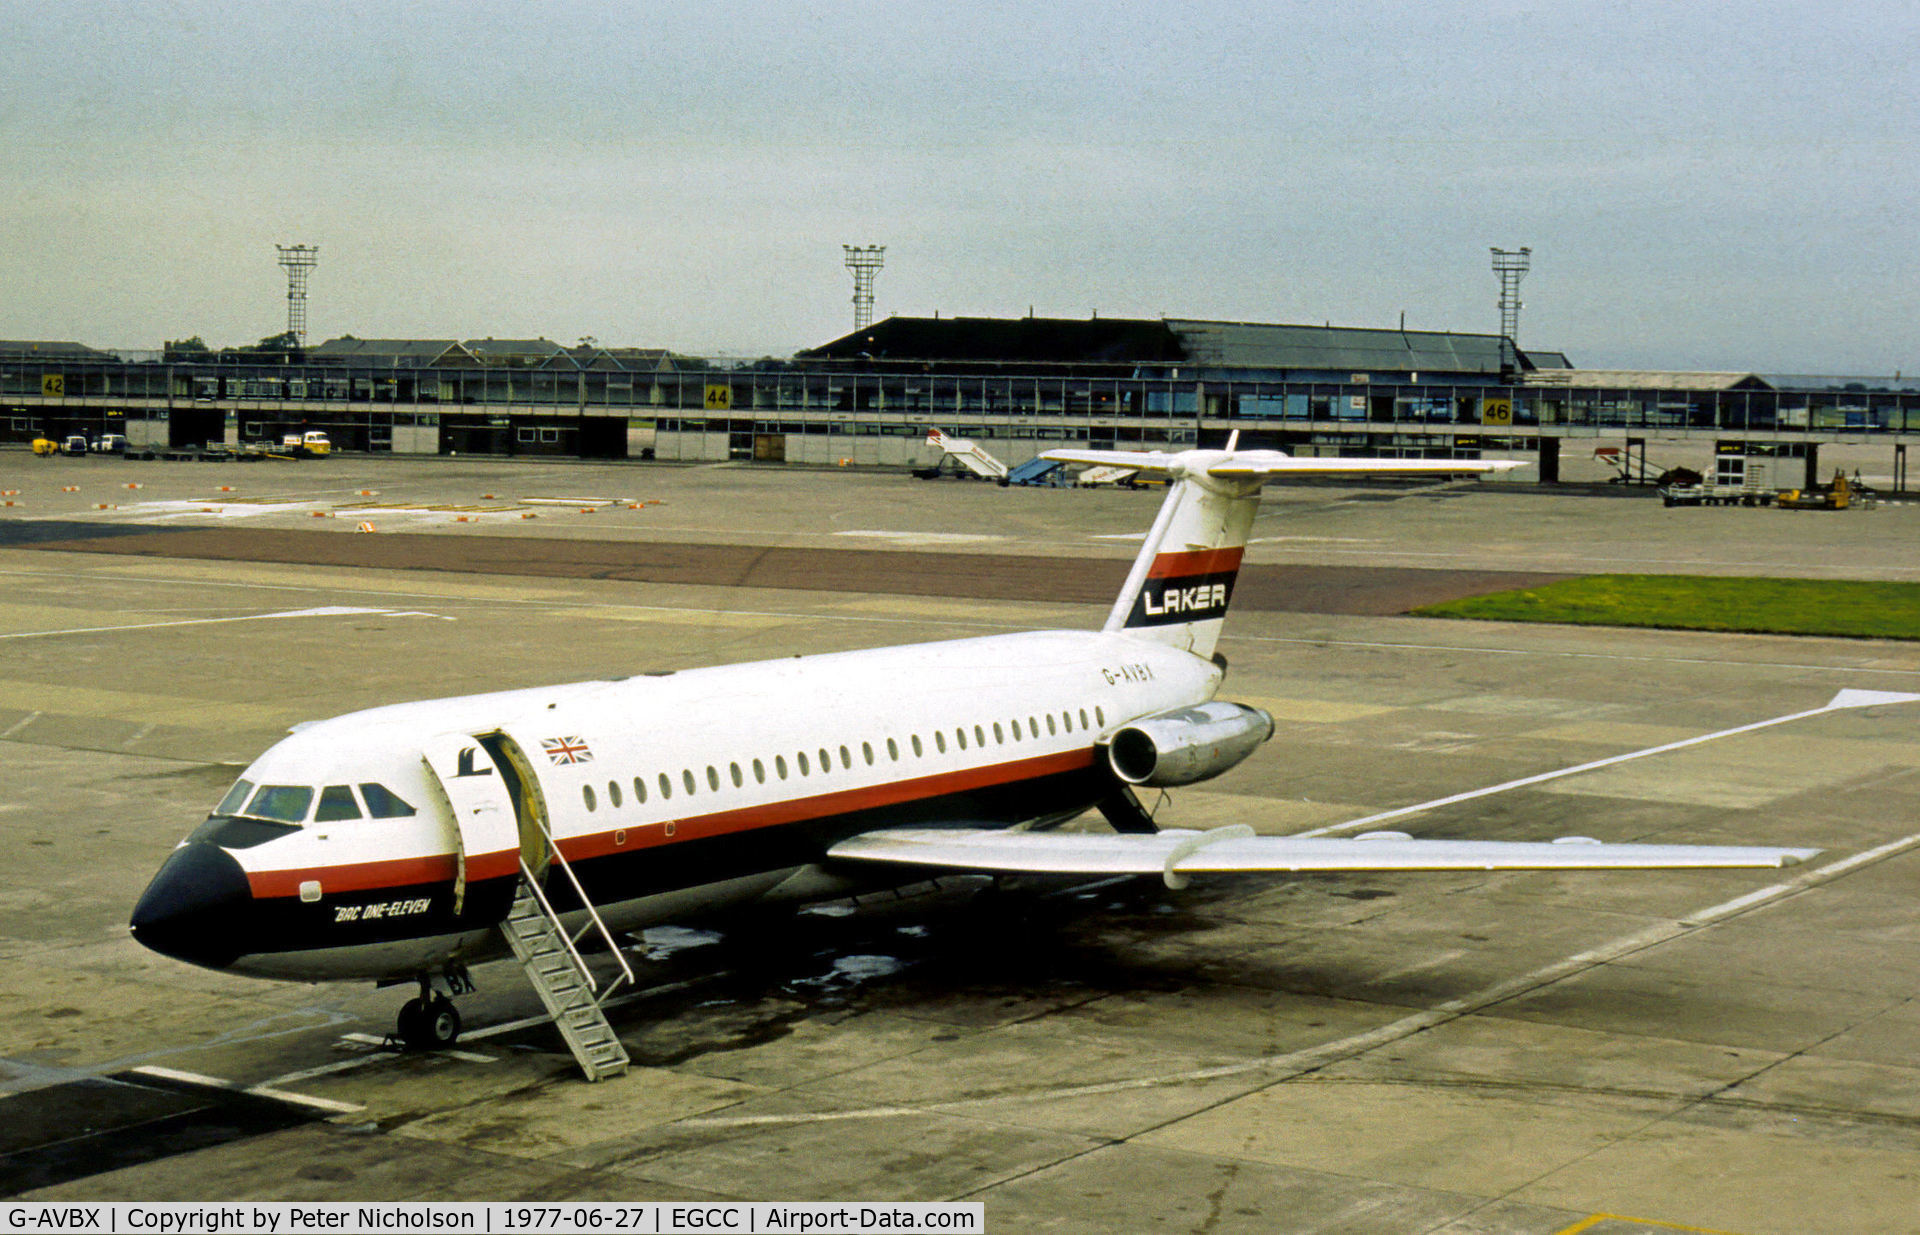 G-AVBX, 1967 BAC 111-320AZ One-Eleven C/N BAC.109, One Eleven of Laker Airways as seen at Manchester in the Summer of 1977.